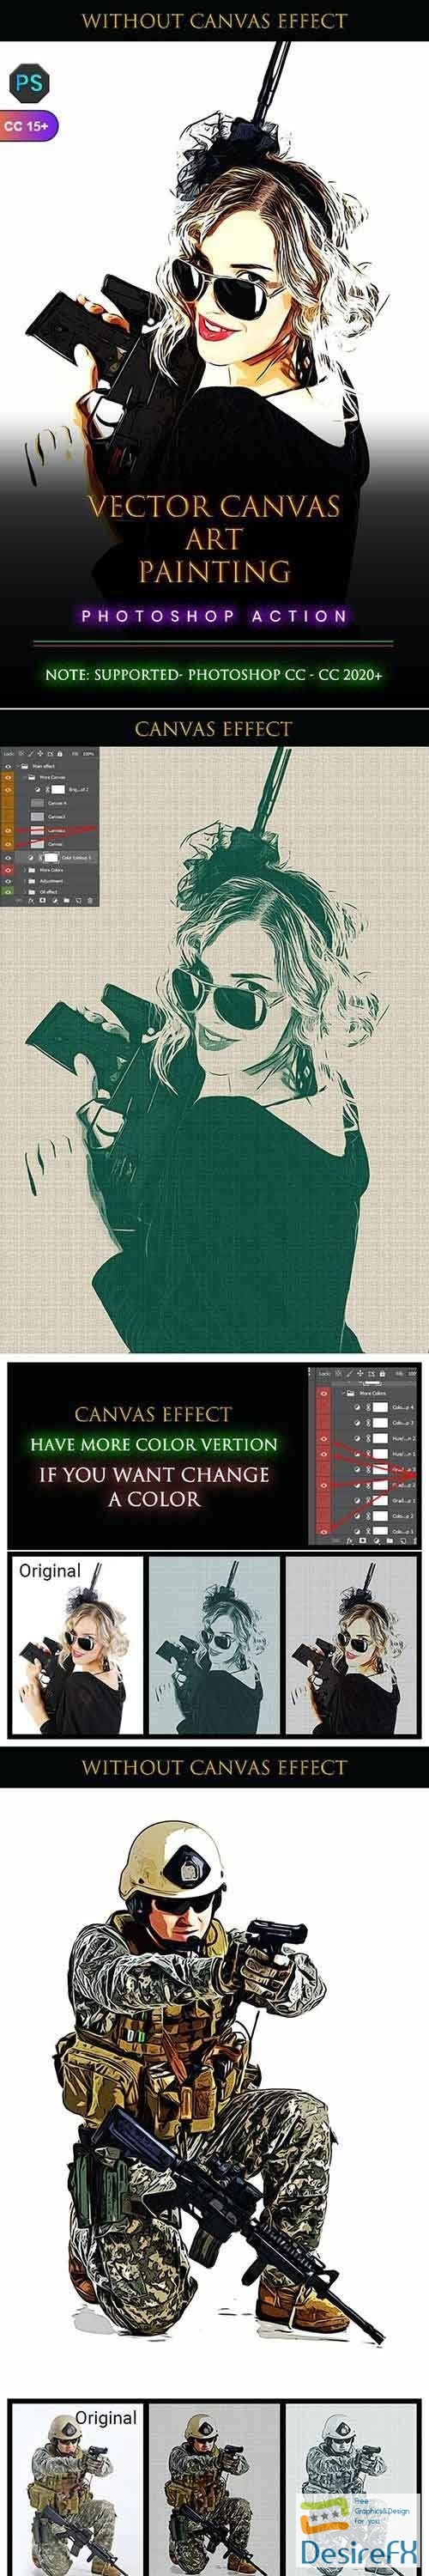 GraphicRiver - Vector Canvas Art Painting Photoshop Action 33762445